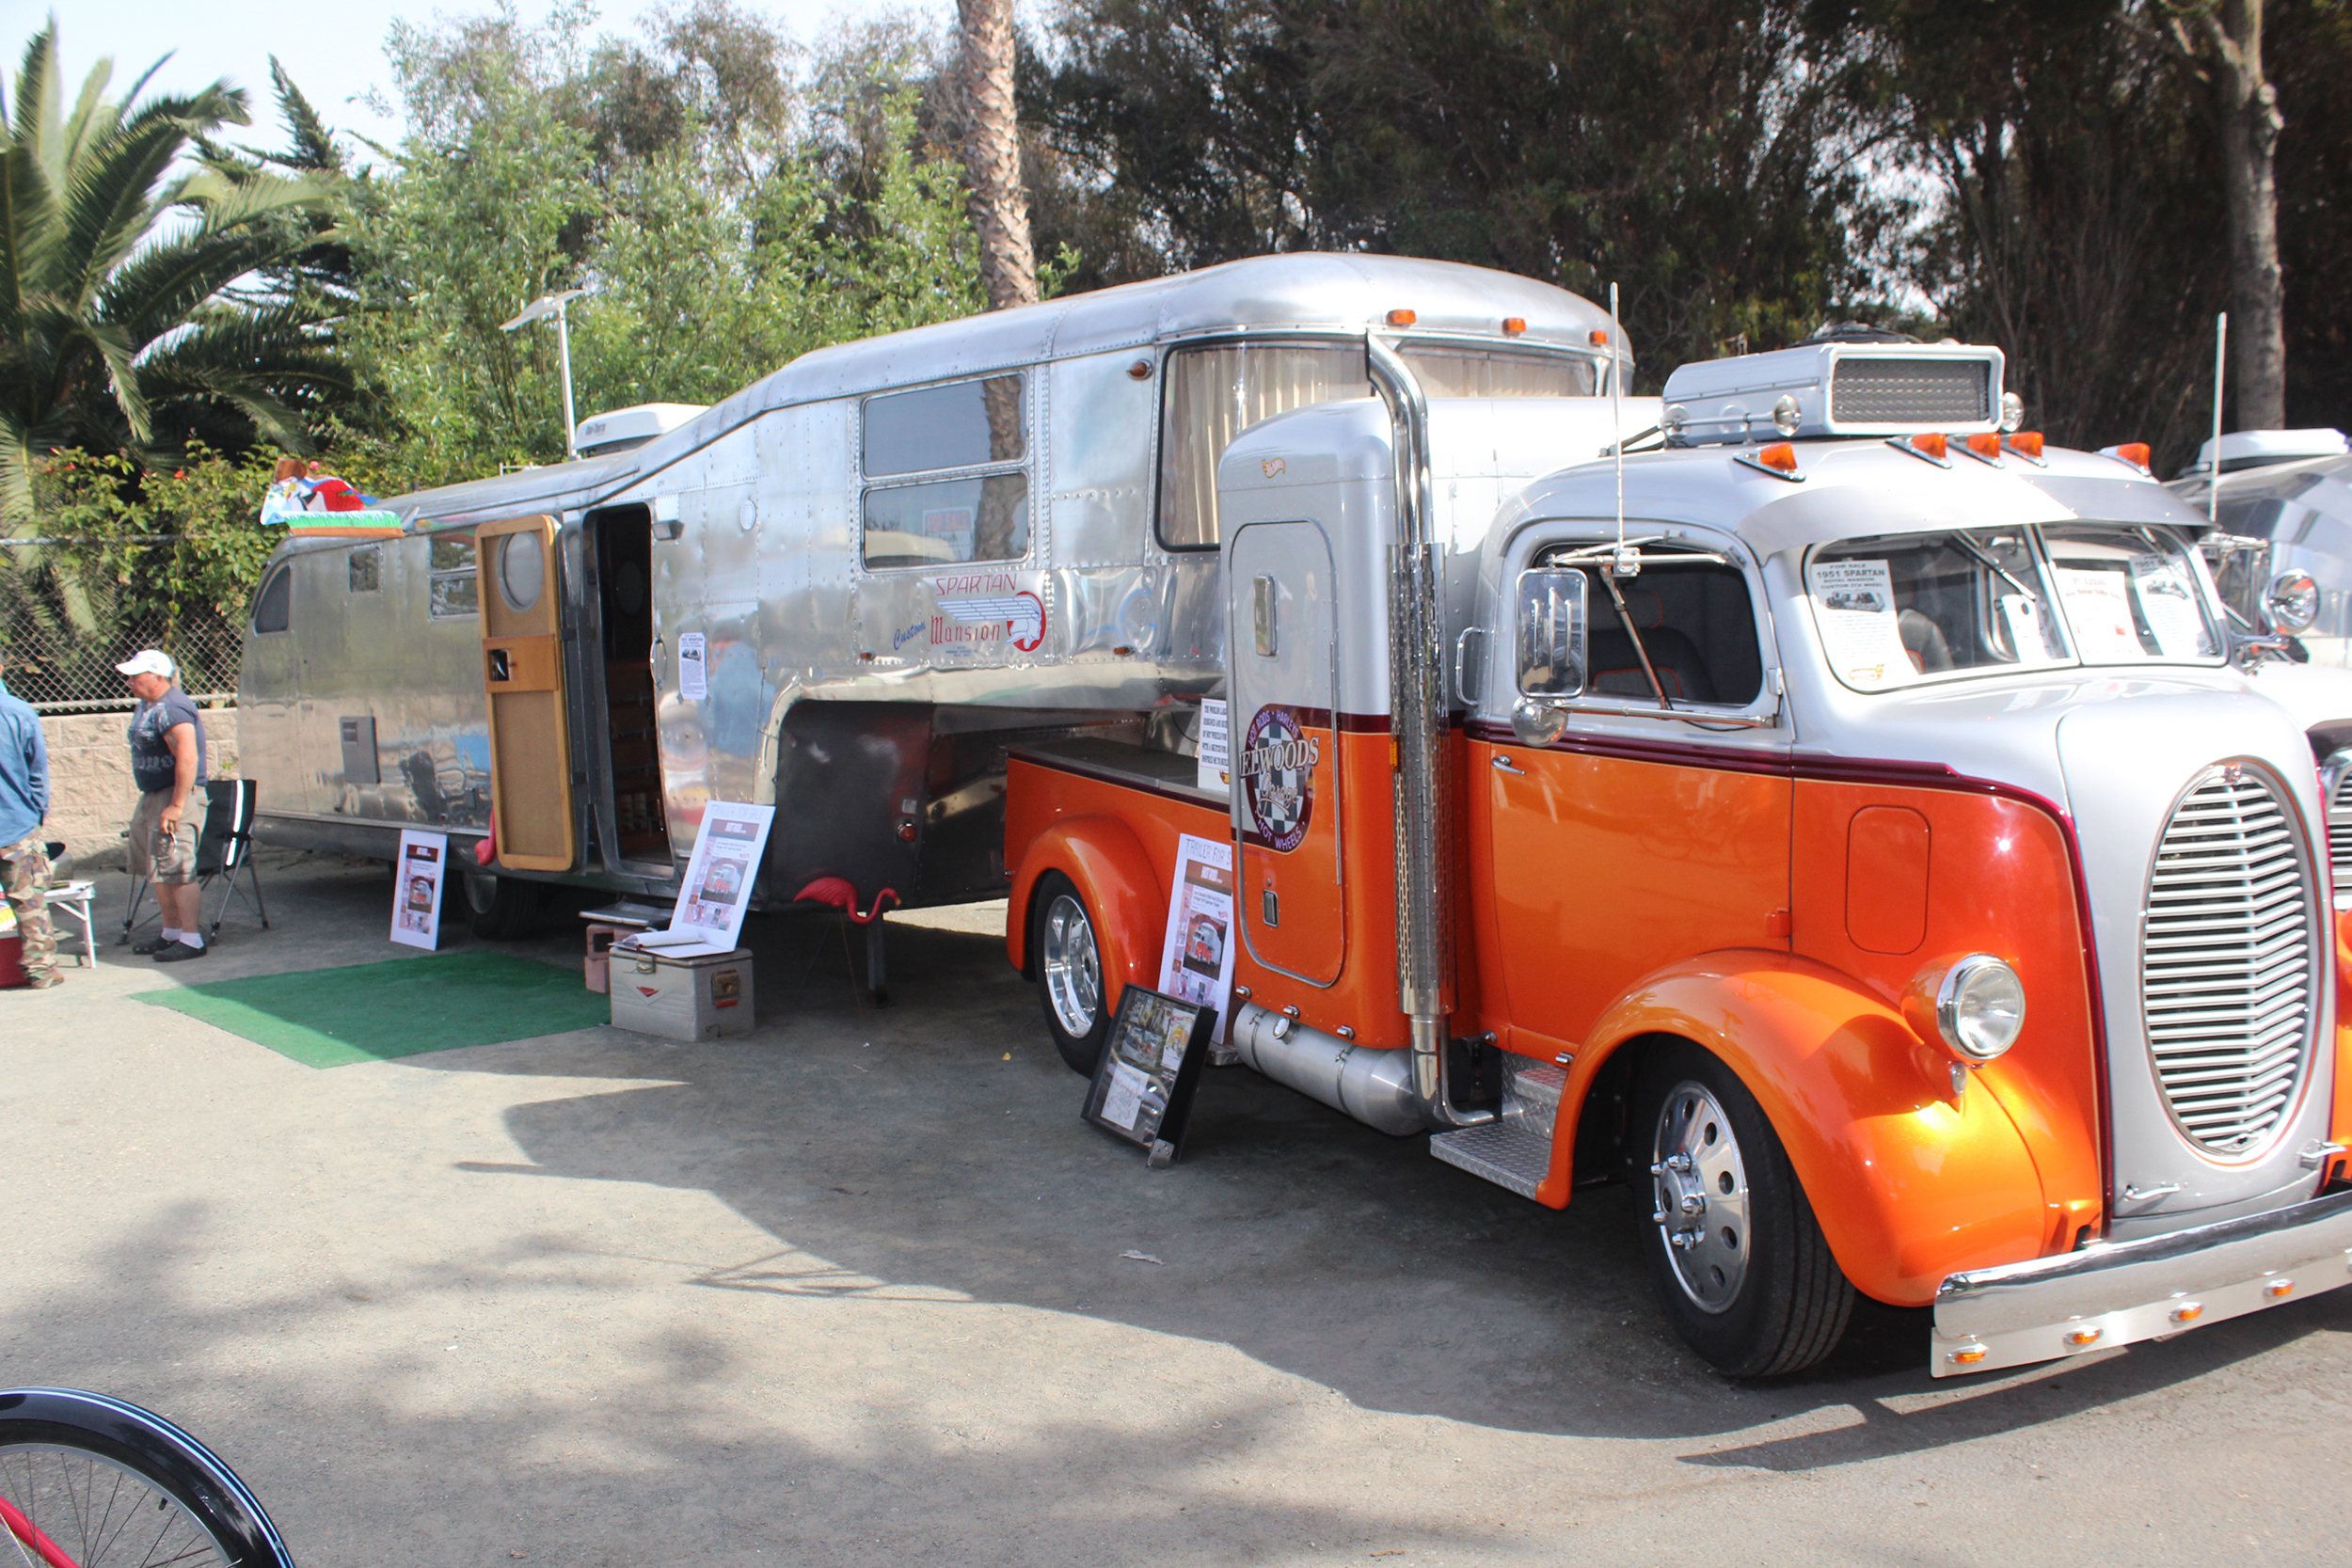 Brawny vintage tow vehicle hitched to a silver, vintage fifth-wheel.